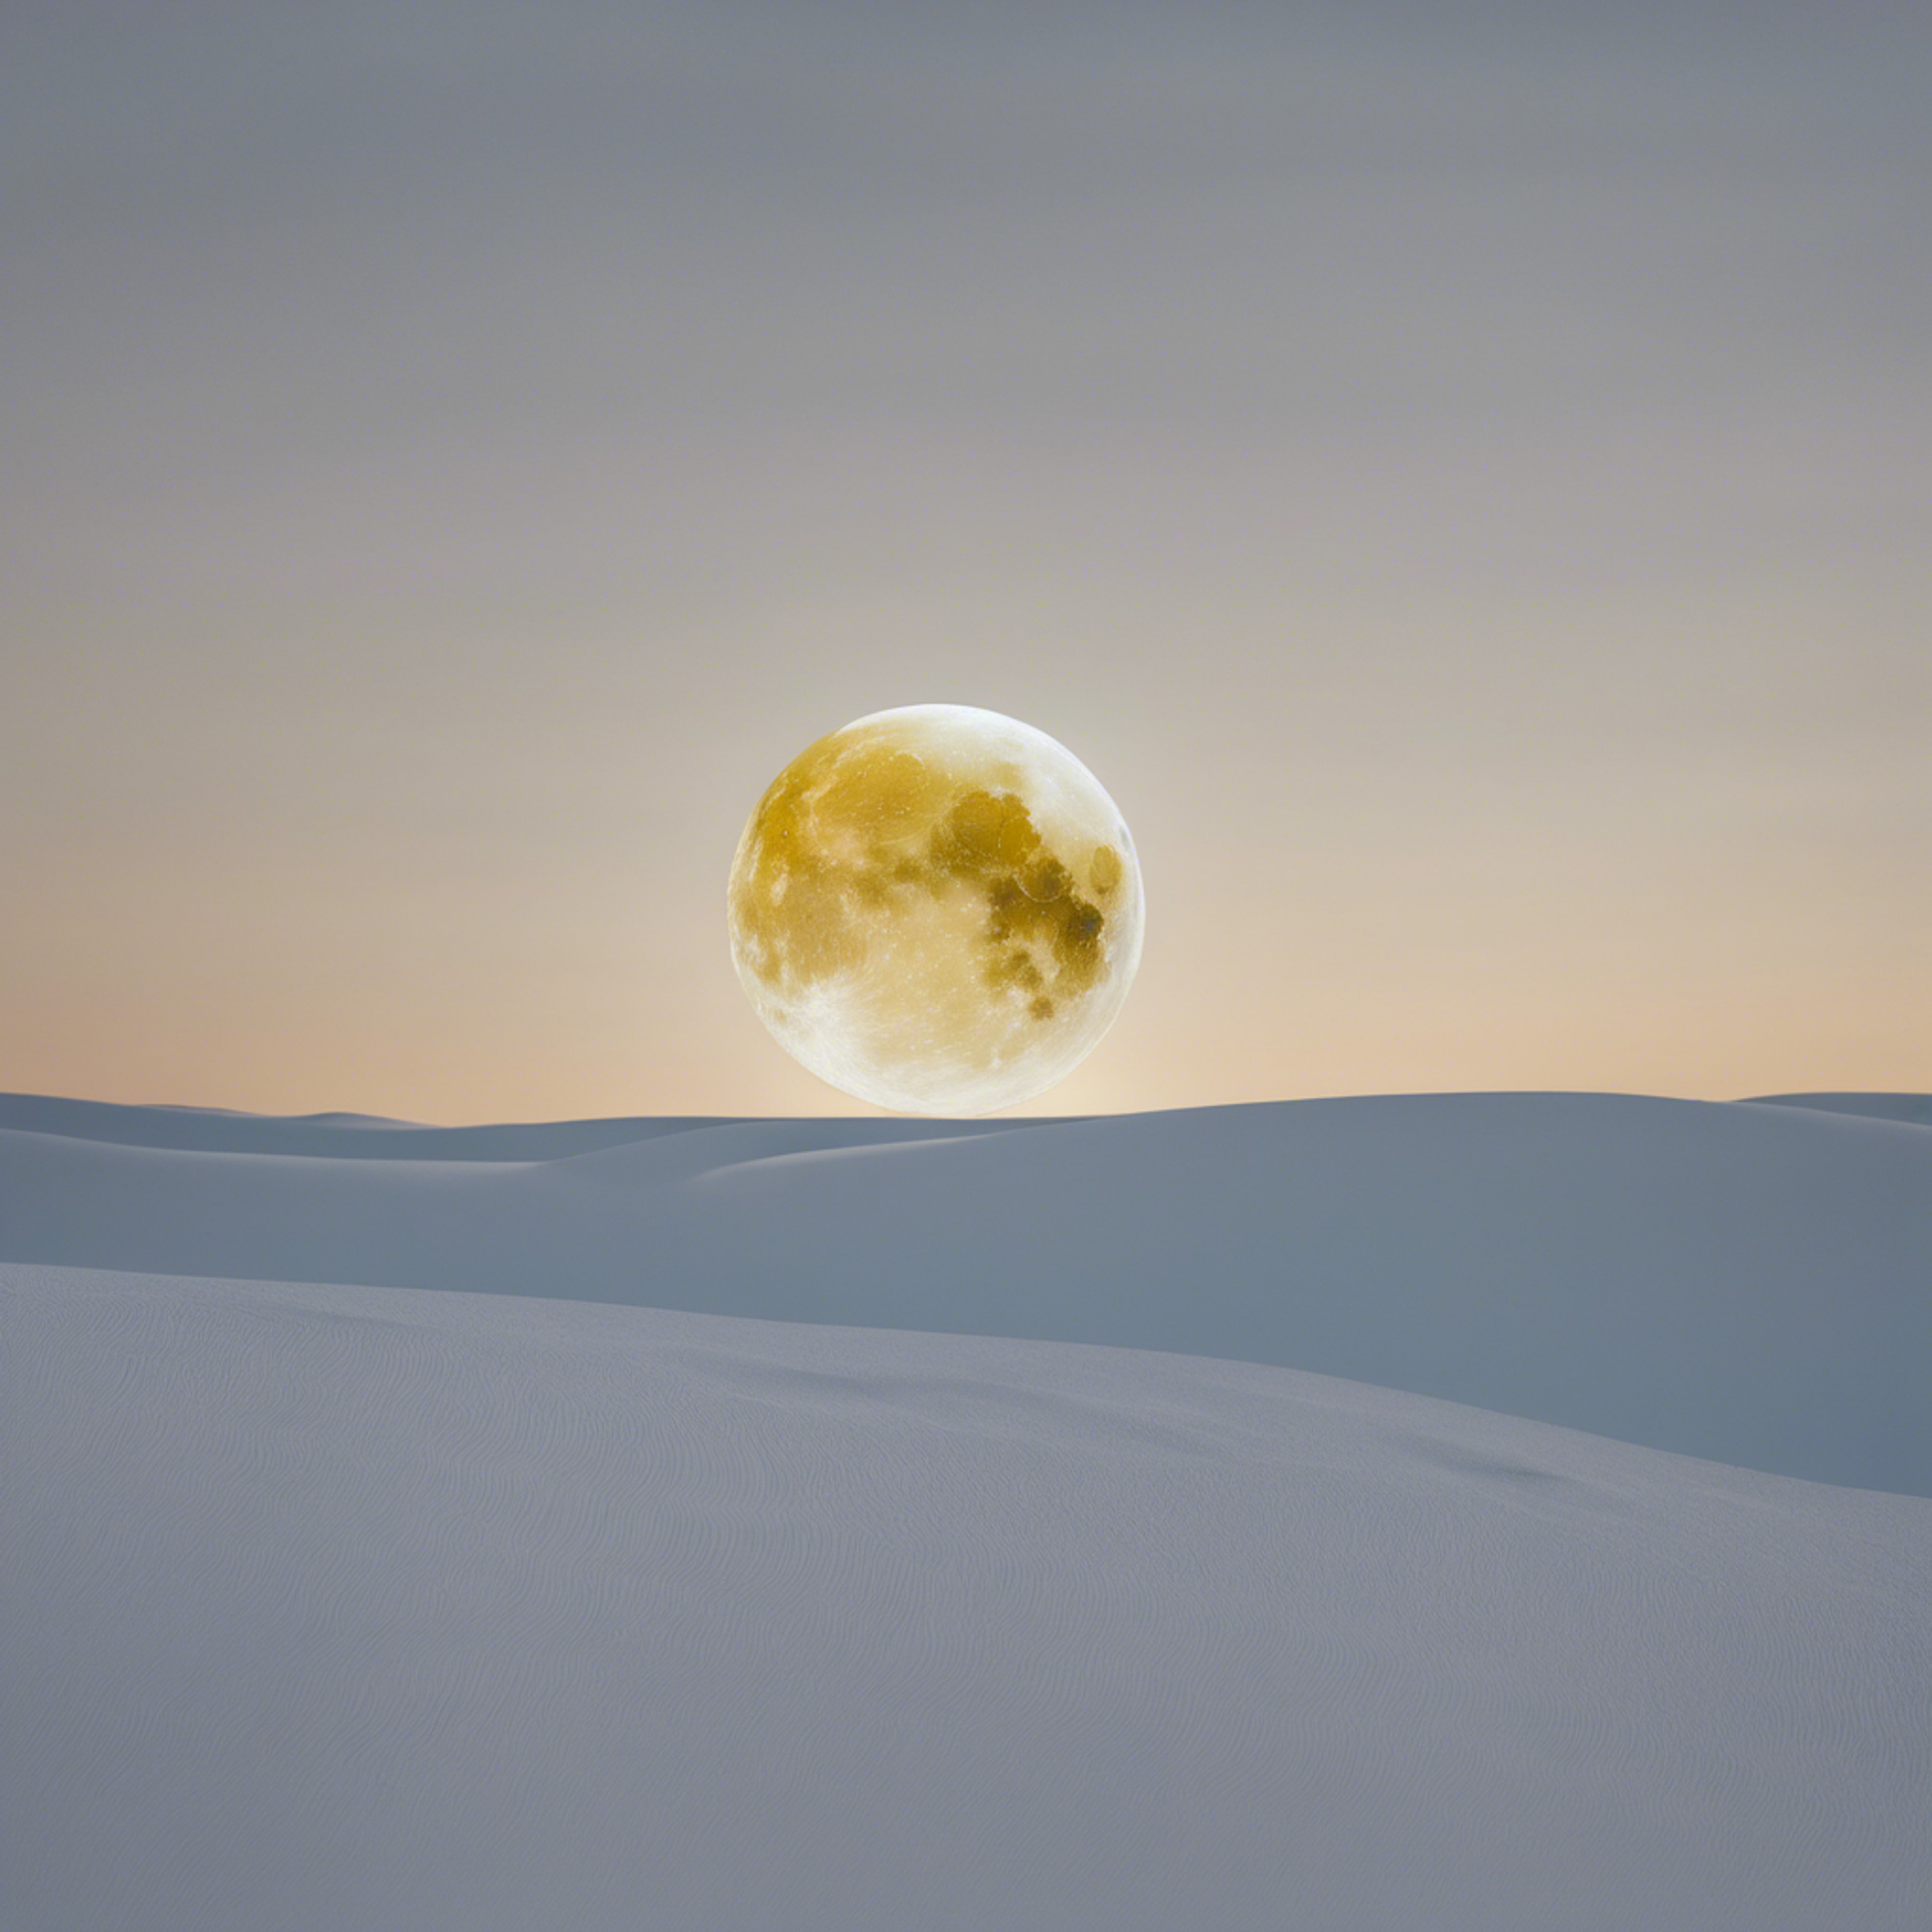 A radiant full moon casting a subtle yellow glow over a calm white desert. Hintergrund[140acfbb6335412b878f]